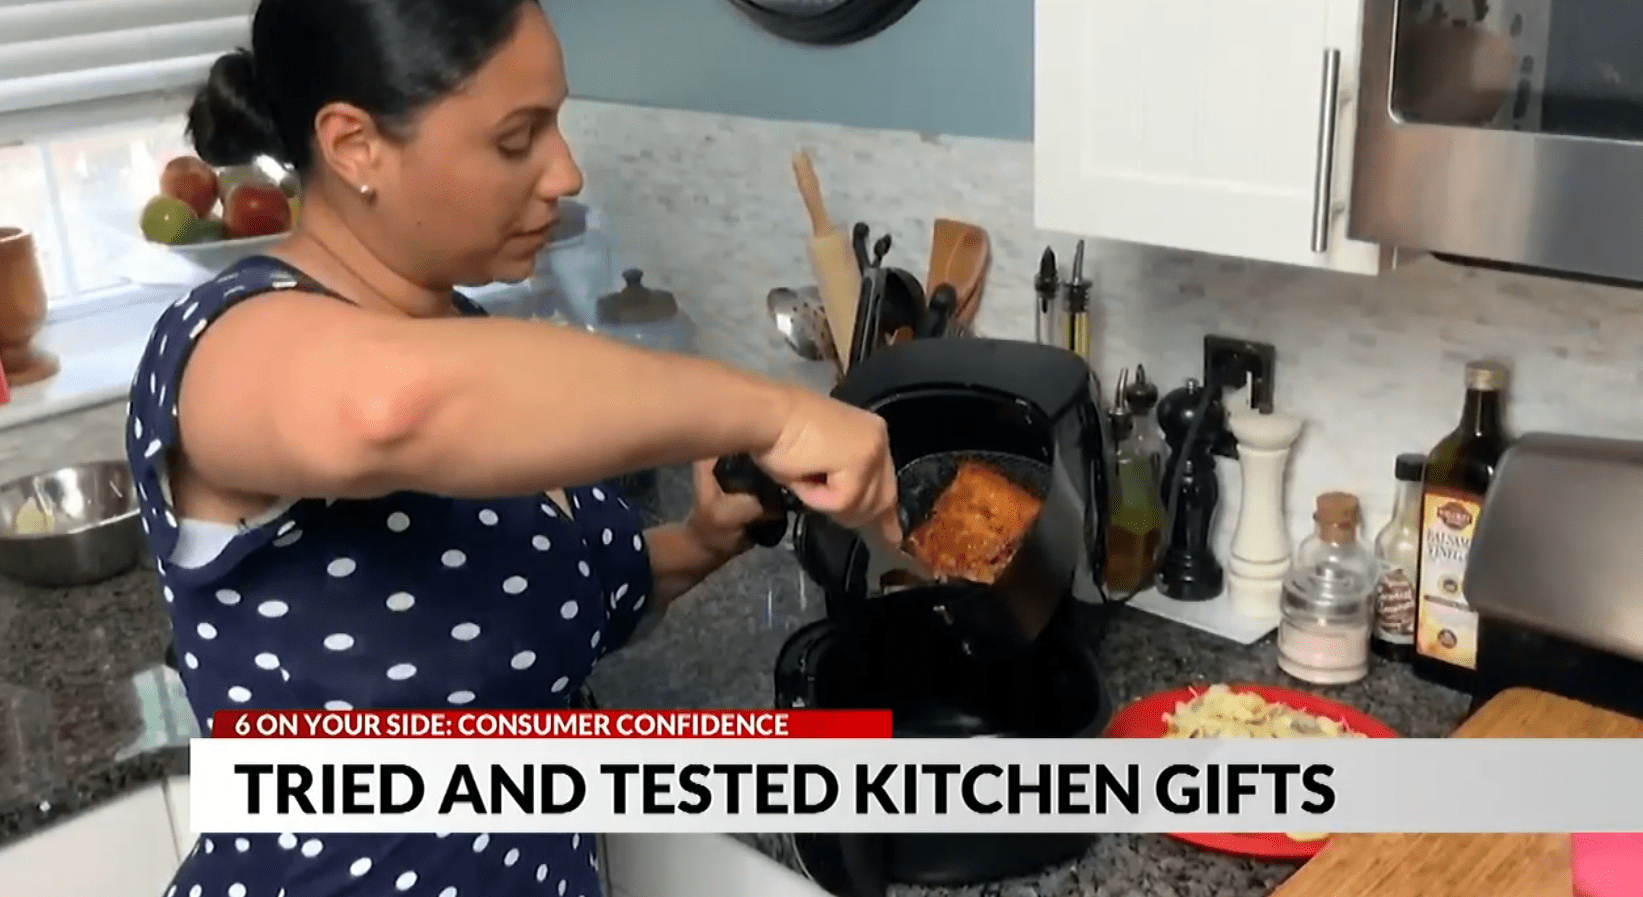 https://www.kaaltv.com/wp-content/uploads/2023/12/Tried_and_Tested_Kitchen_Gifts.mp4-VLC-media-player-12_11_2023-7_46_17-AM.png